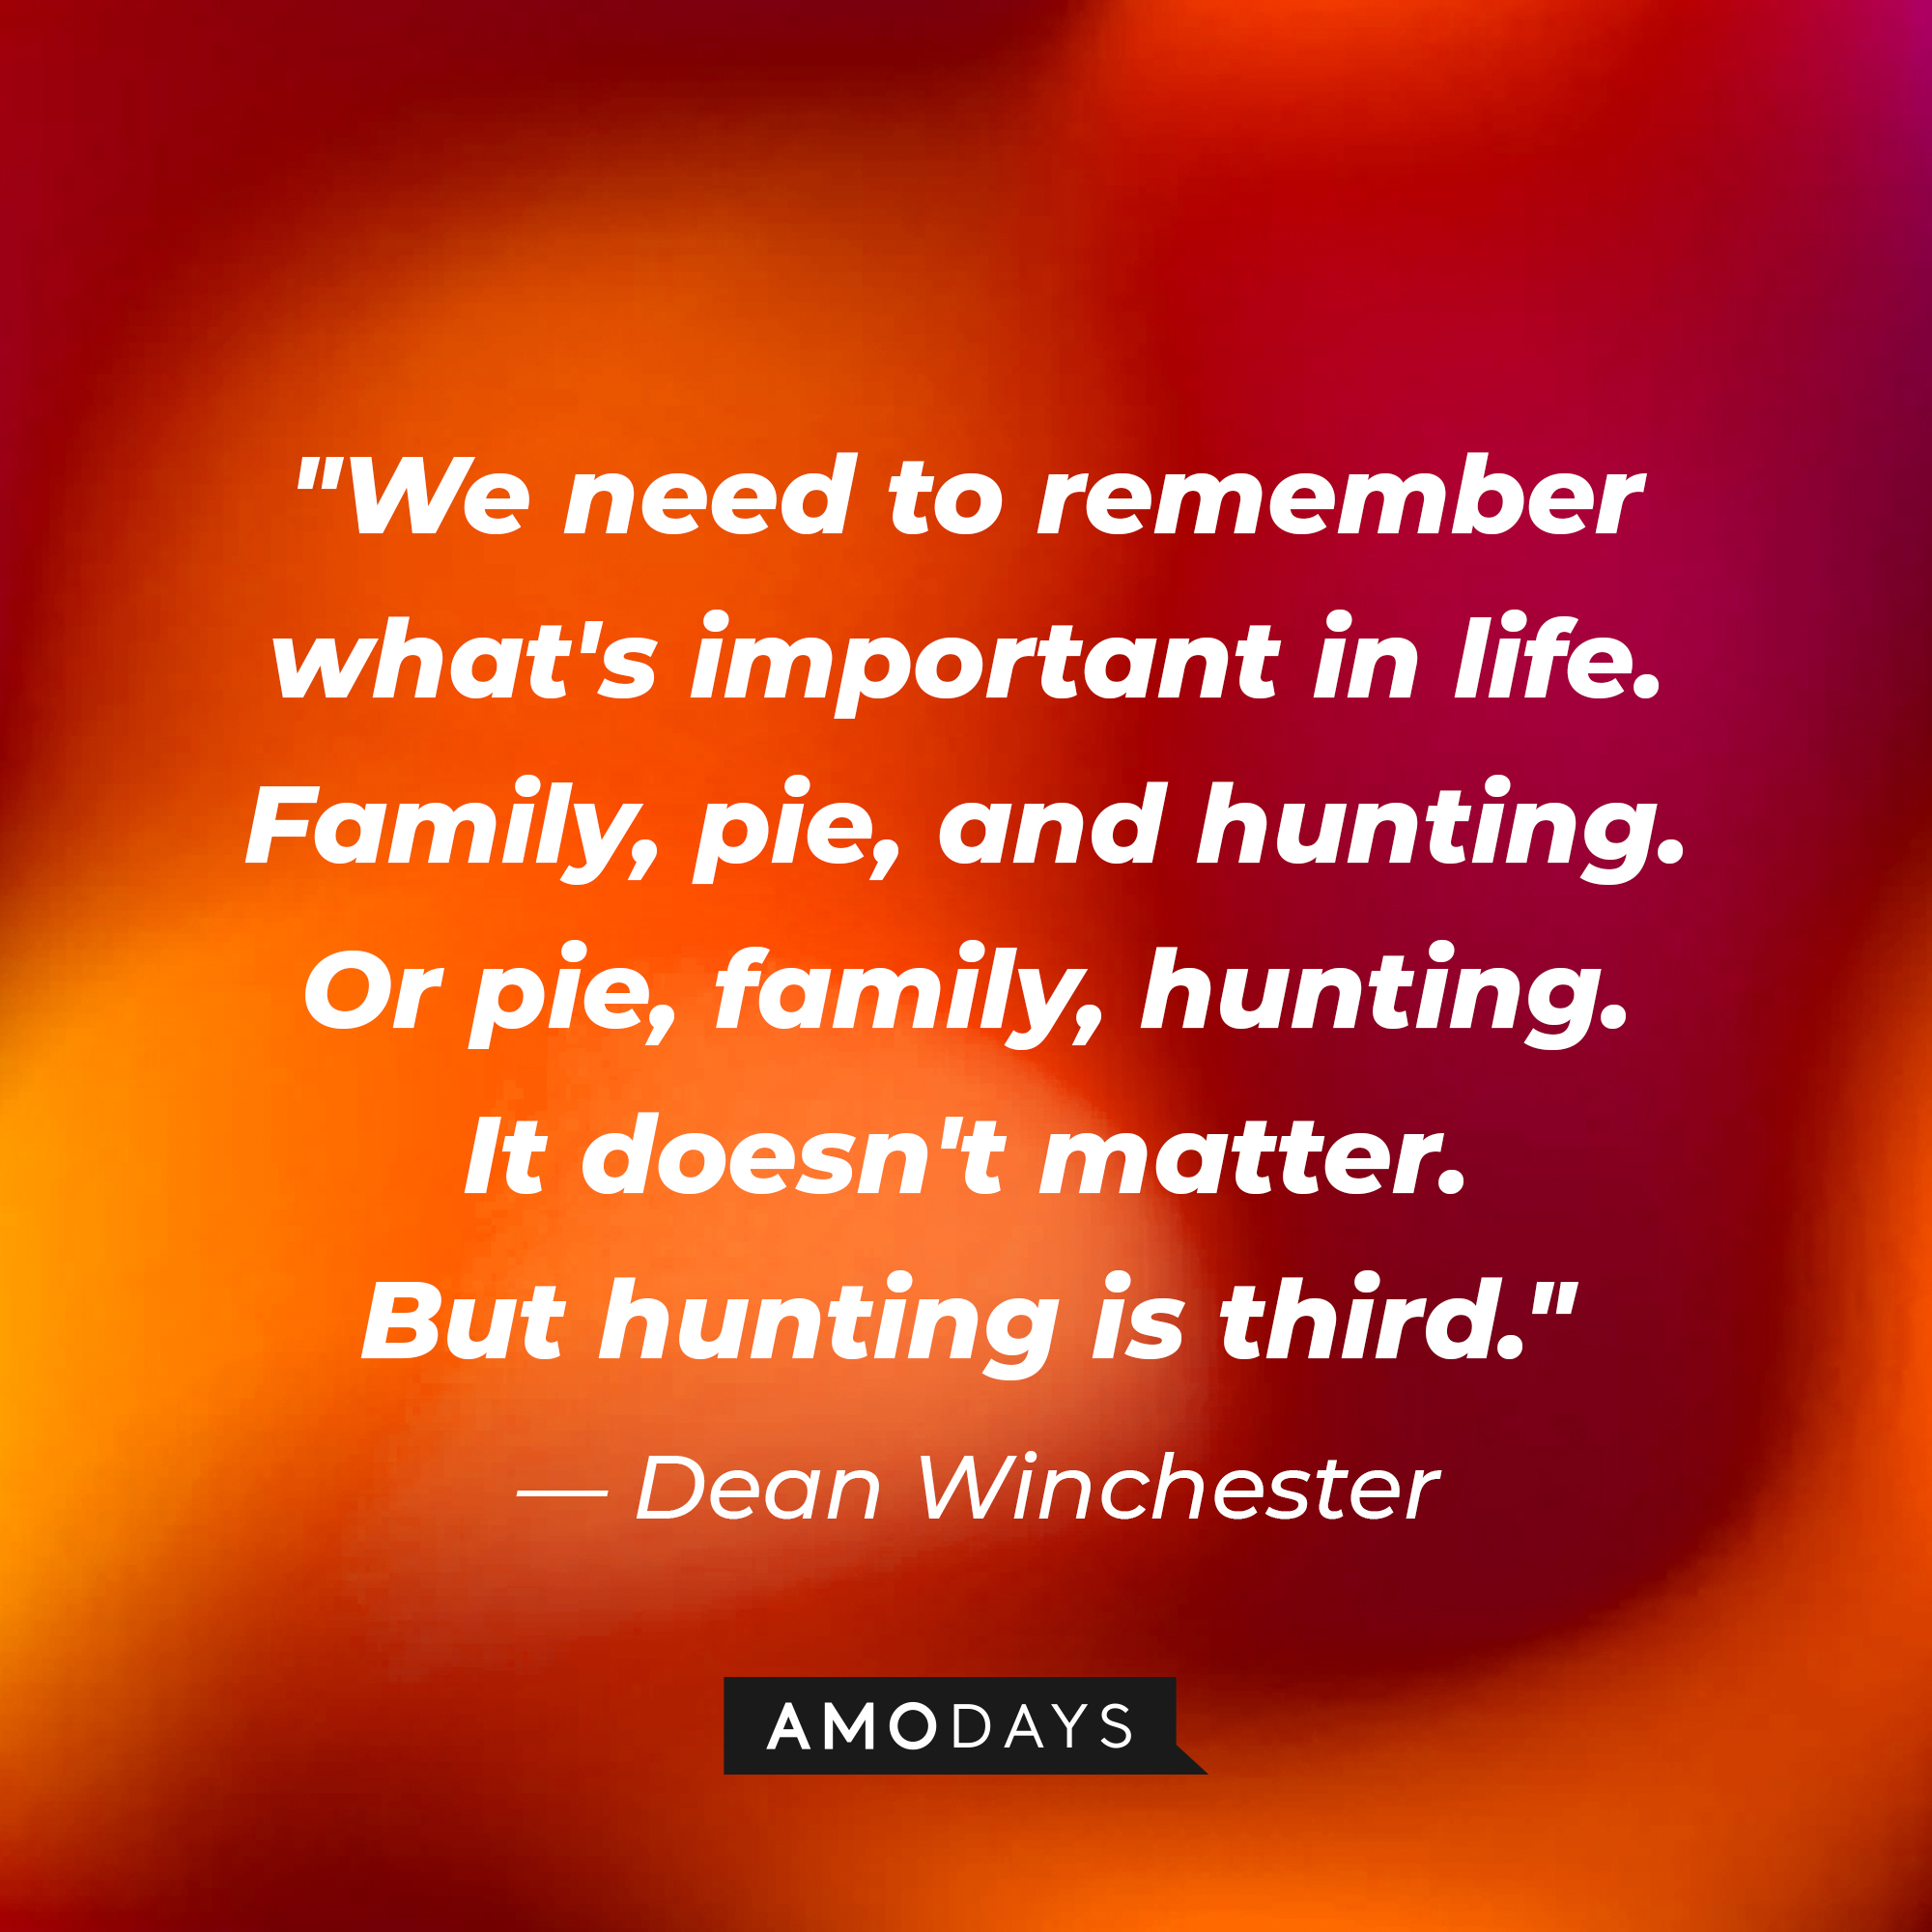 Dean Winchester's quote, "We need to remember what's important in life. Family, pie, and hunting. Or pie, family, hunting. It doesn't matter. But hunting is third." | Source: Amodays